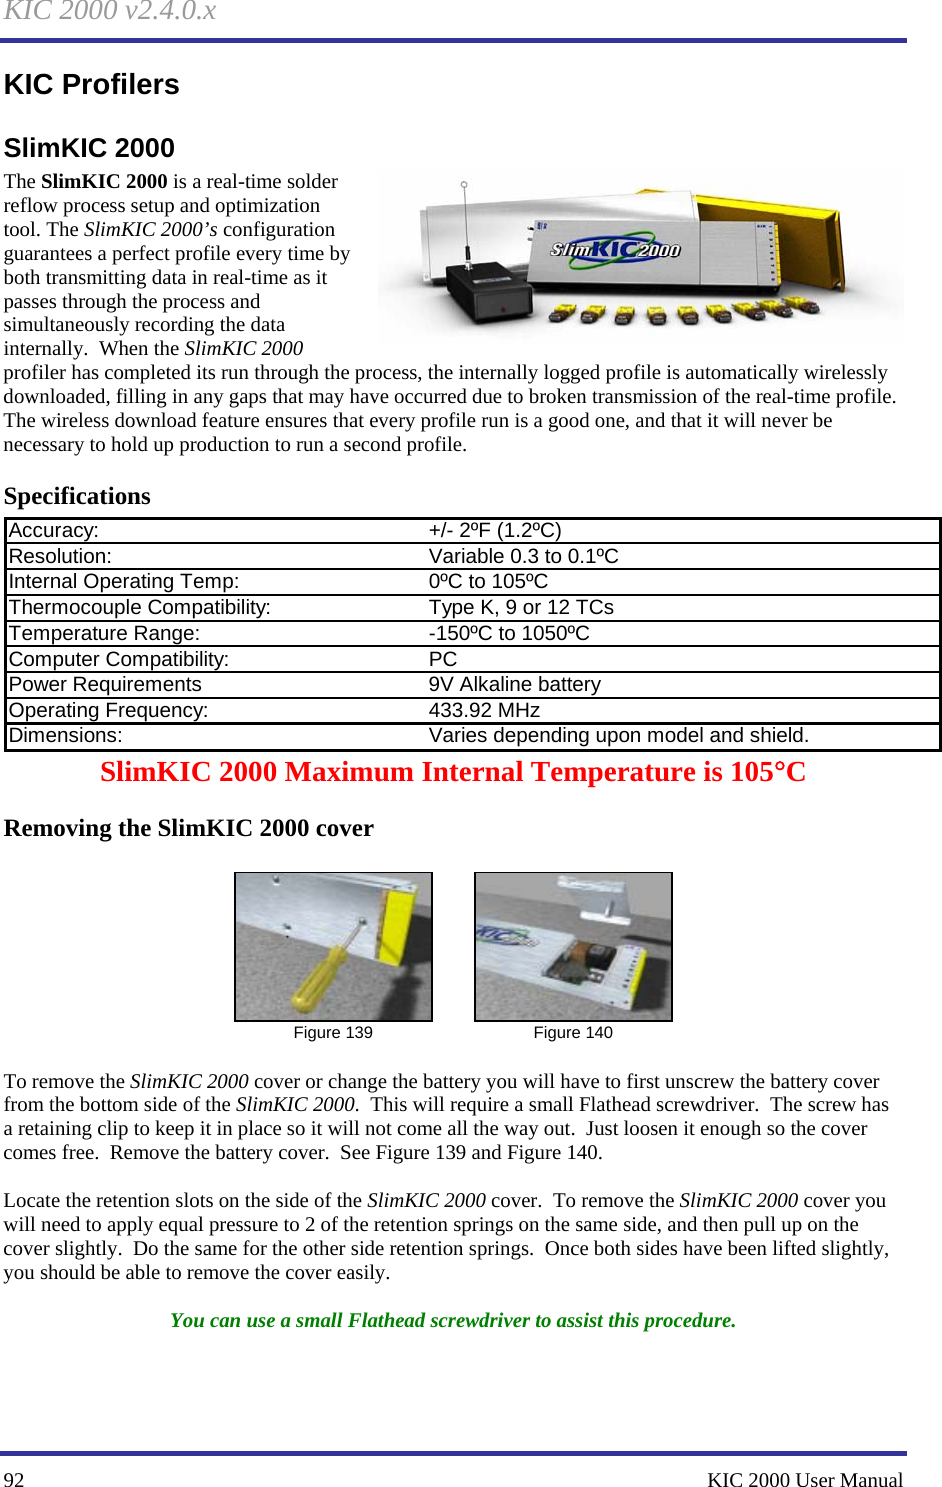 KIC 2000 v2.4.0.x 92    KIC 2000 User Manual KIC Profilers SlimKIC 2000 The SlimKIC 2000 is a real-time solder reflow process setup and optimization tool. The SlimKIC 2000’s configuration guarantees a perfect profile every time by both transmitting data in real-time as it passes through the process and simultaneously recording the data internally.  When the SlimKIC 2000 profiler has completed its run through the process, the internally logged profile is automatically wirelessly downloaded, filling in any gaps that may have occurred due to broken transmission of the real-time profile.  The wireless download feature ensures that every profile run is a good one, and that it will never be necessary to hold up production to run a second profile. Specifications Accuracy: +/- 2ºF (1.2ºC)Resolution: Variable 0.3 to 0.1ºCInternal Operating Temp: 0ºC to 105ºCThermocouple Compatibility: Type K, 9 or 12 TCsTemperature Range: -150ºC to 1050ºCComputer Compatibility: PCPower Requirements 9V Alkaline batteryOperating Frequency: 433.92 MHzDimensions: Varies depending upon model and shield.SlimKIC 2000 Maximum Internal Temperature is 105°C Removing the SlimKIC 2000 cover   Figure 139   Figure 140  To remove the SlimKIC 2000 cover or change the battery you will have to first unscrew the battery cover from the bottom side of the SlimKIC 2000.  This will require a small Flathead screwdriver.  The screw has a retaining clip to keep it in place so it will not come all the way out.  Just loosen it enough so the cover comes free.  Remove the battery cover.  See Figure 139 and Figure 140.    Locate the retention slots on the side of the SlimKIC 2000 cover.  To remove the SlimKIC 2000 cover you will need to apply equal pressure to 2 of the retention springs on the same side, and then pull up on the cover slightly.  Do the same for the other side retention springs.  Once both sides have been lifted slightly, you should be able to remove the cover easily.    You can use a small Flathead screwdriver to assist this procedure. 